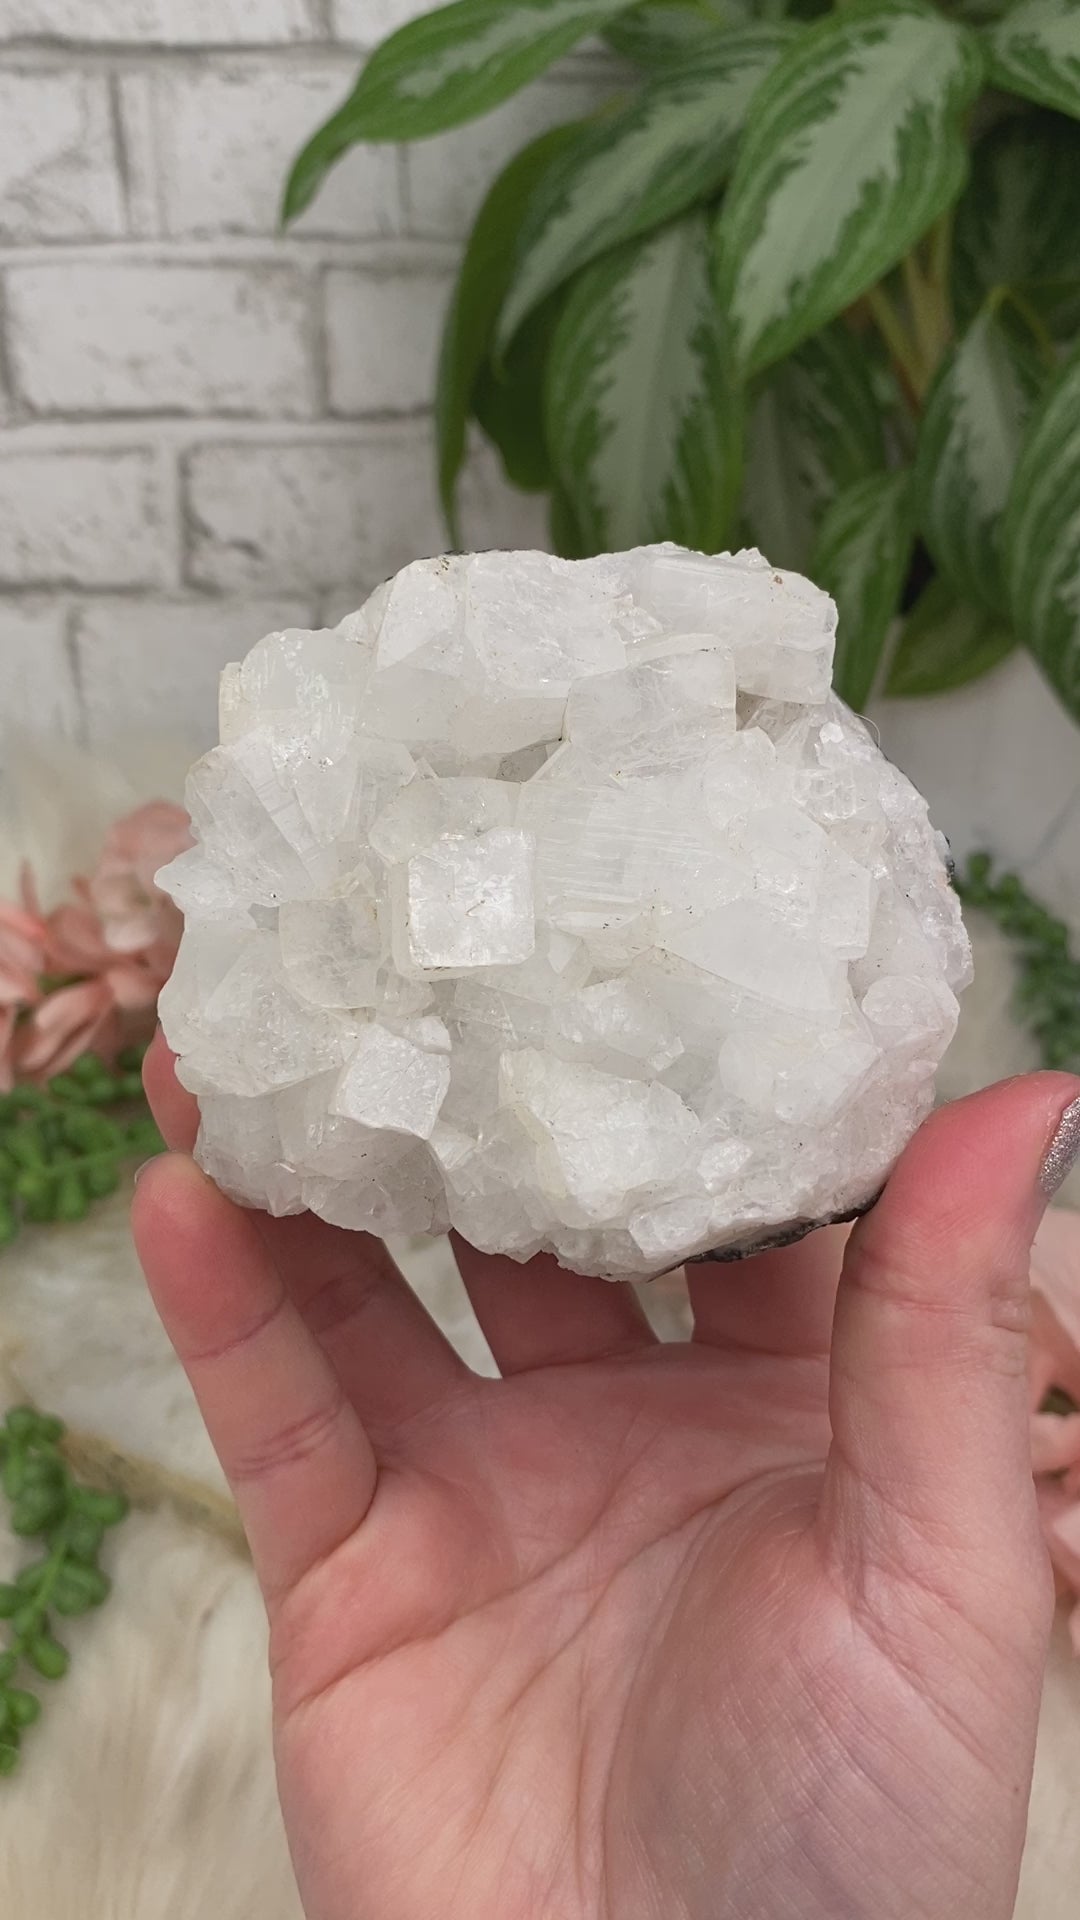 small-apophyllite-crystals